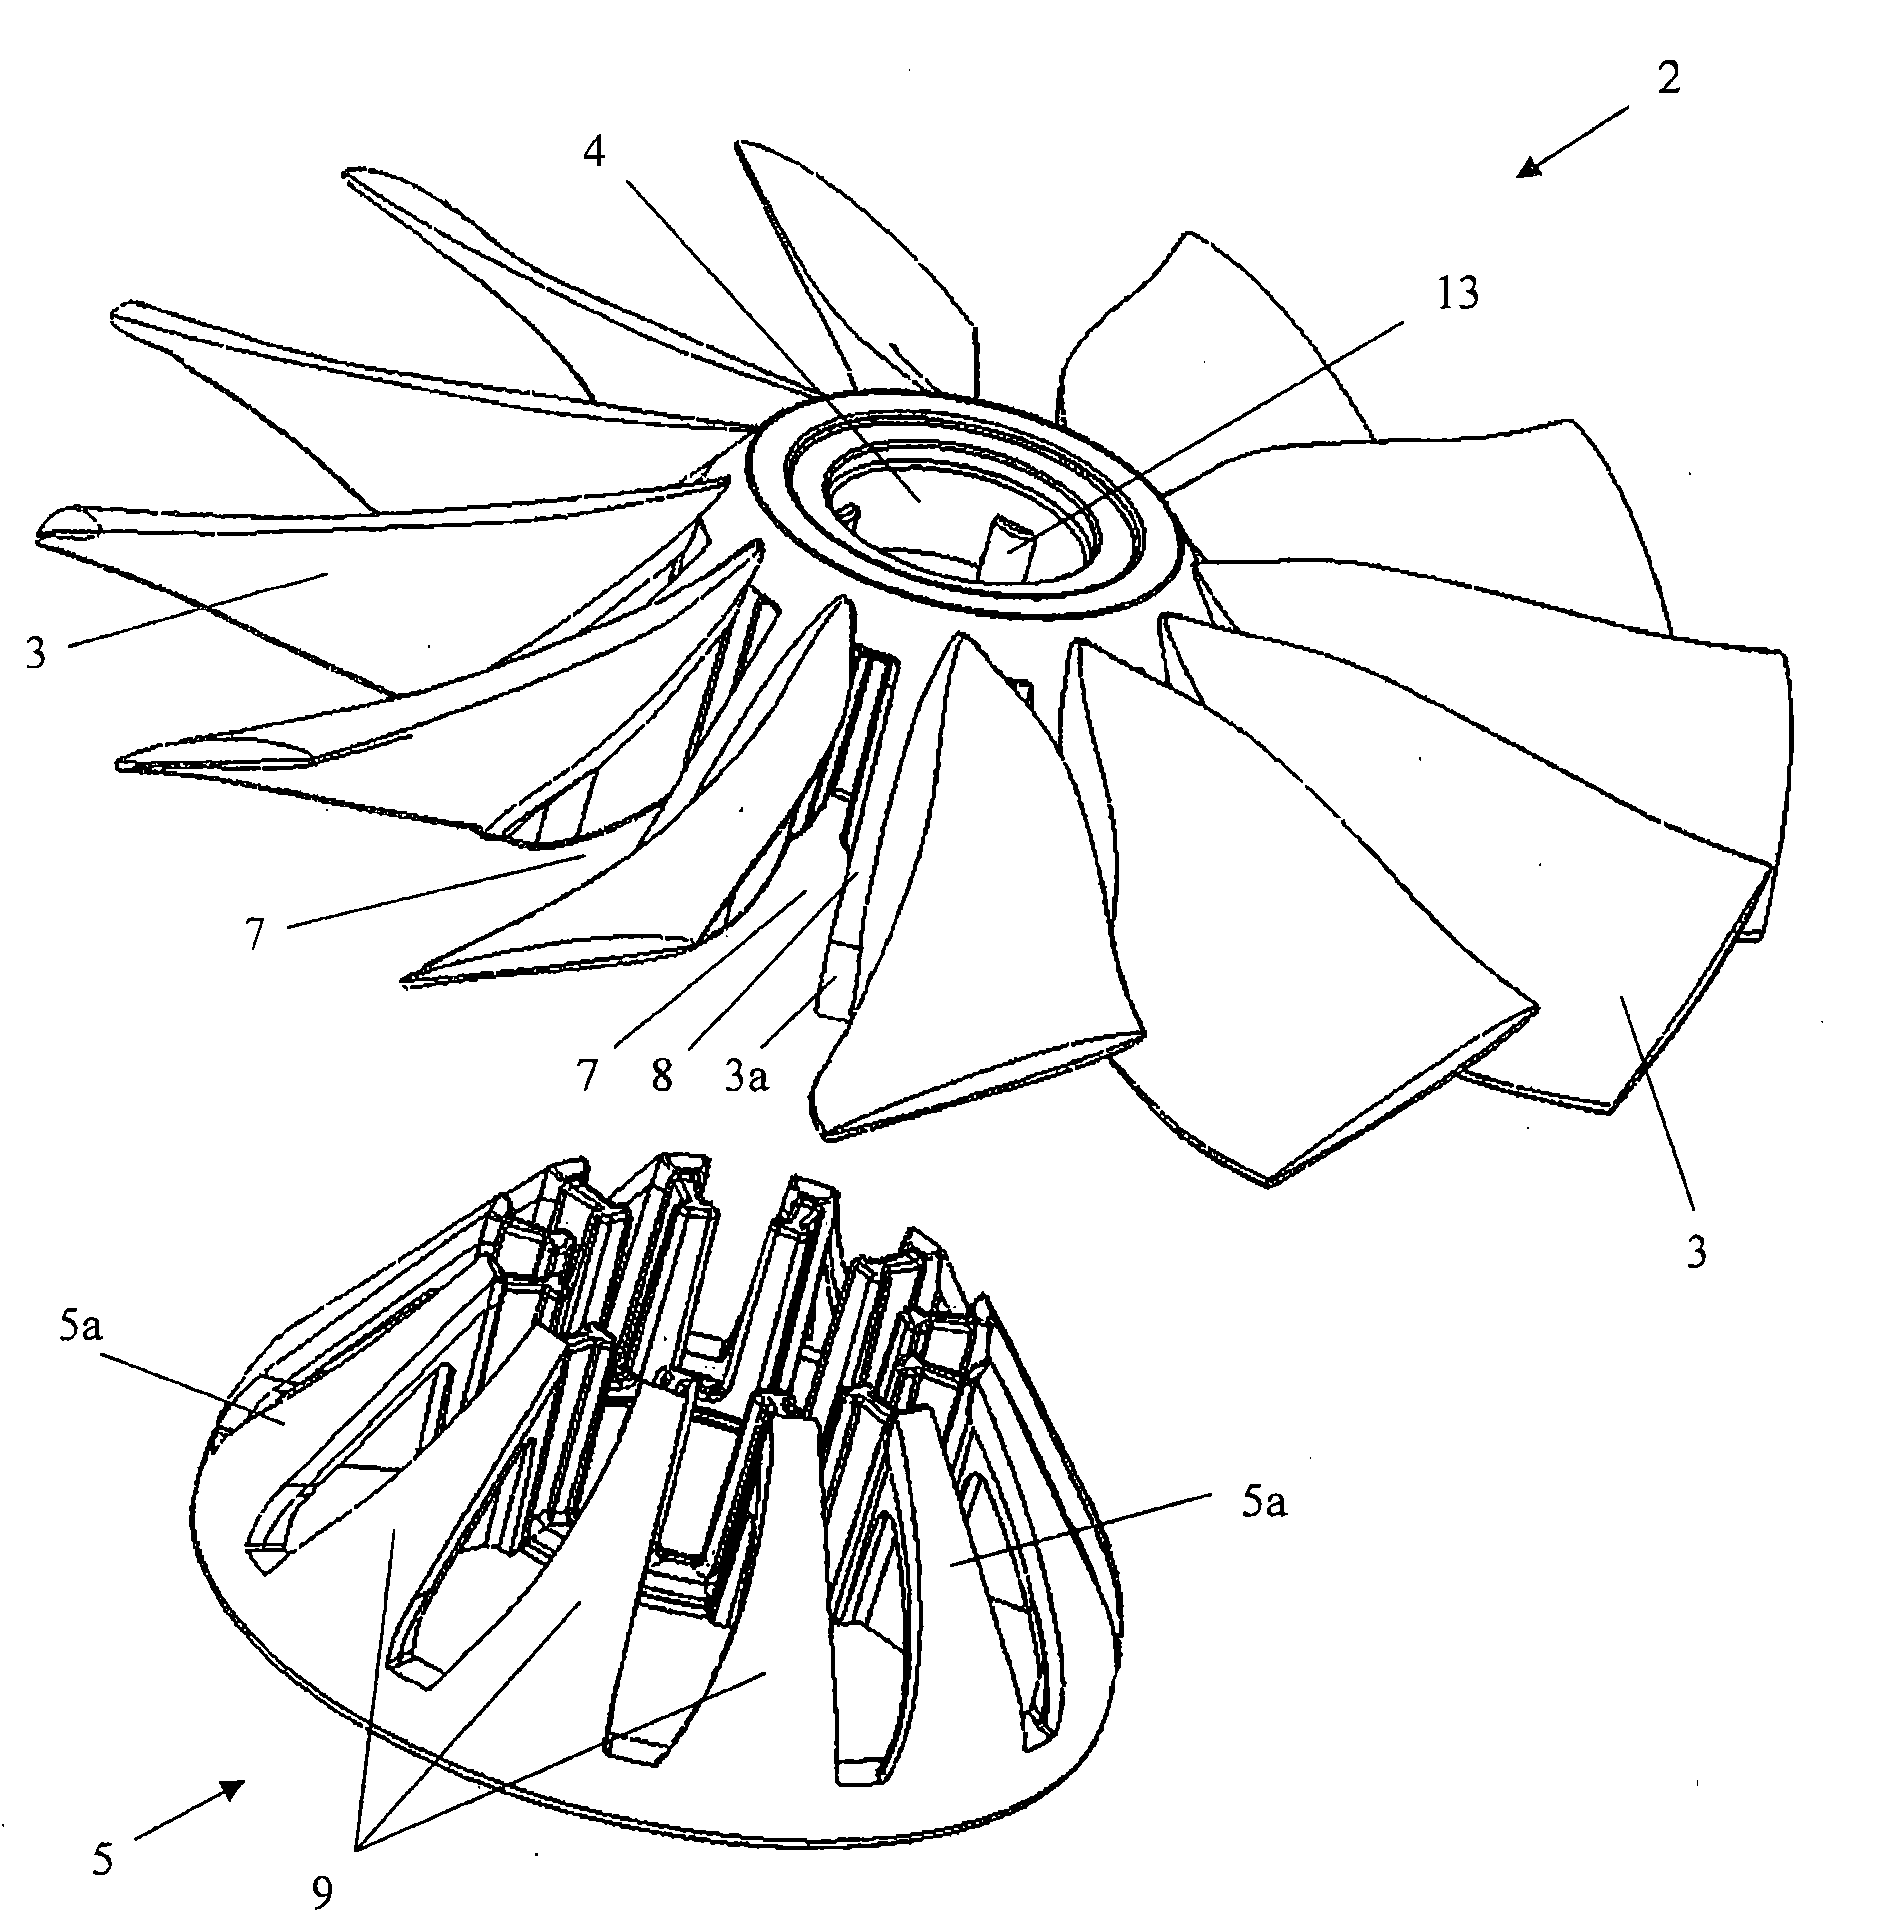 Propeller of a pulsed airflow generator, in particular for a portable blower